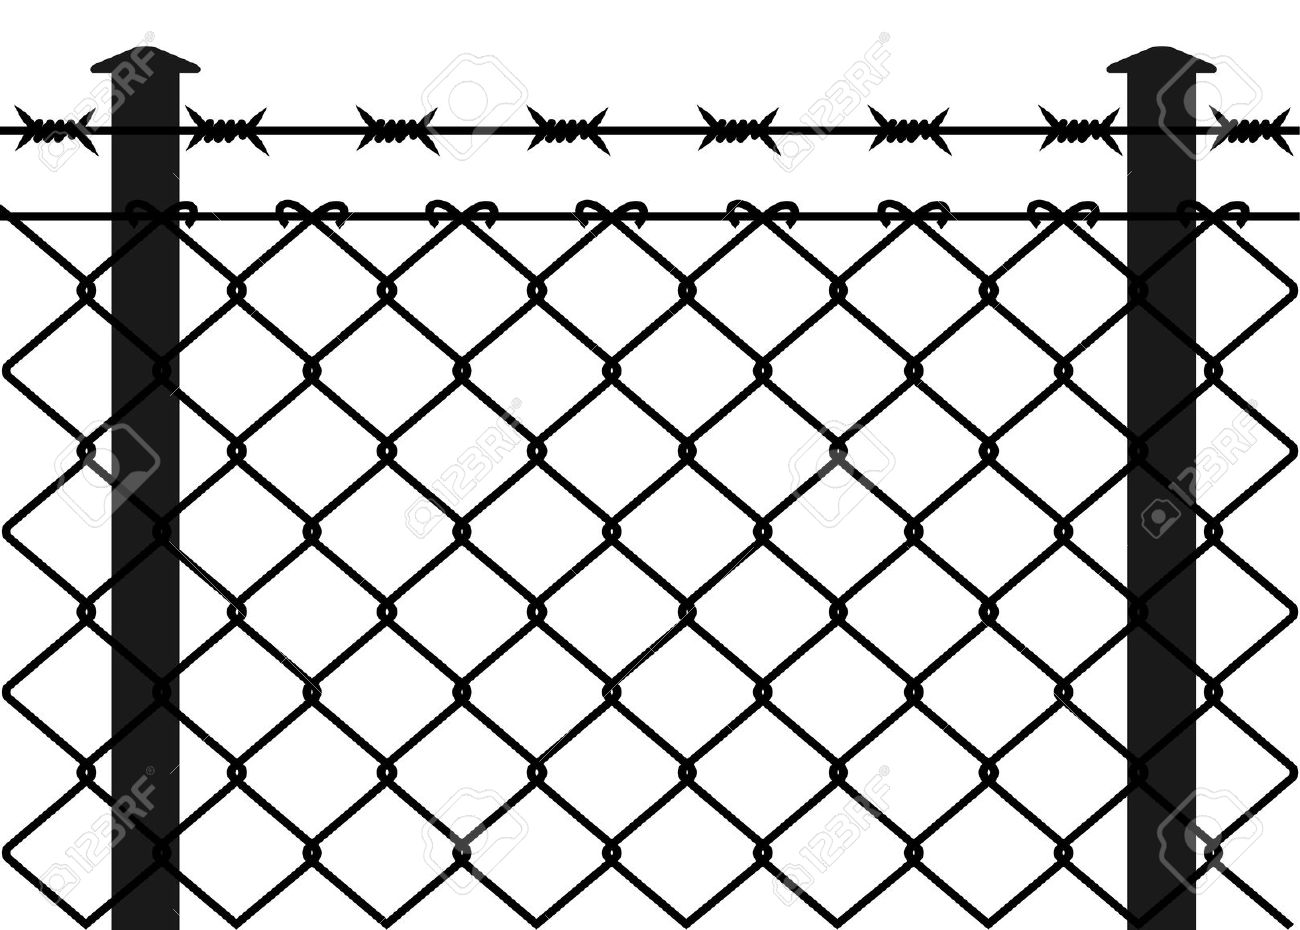 Barbed wire fence clipart - Clipground